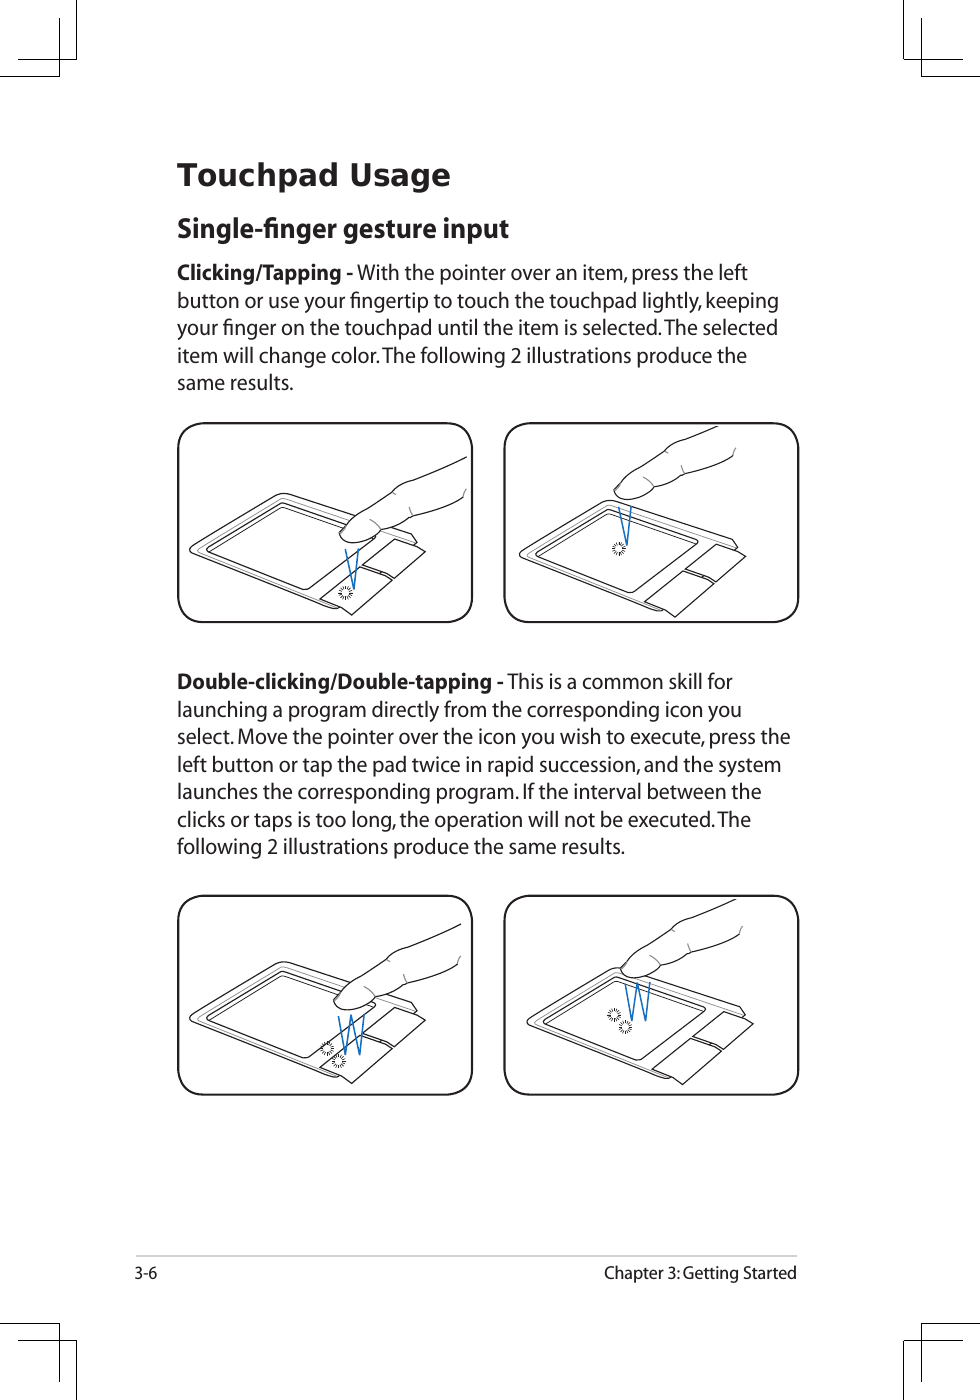 3-6Chapter 3: Getting StartedTouchpad UsageSingle-ﬁnger gesture inputClicking/Tapping - With the pointer over an item, press the left button or use your ﬁngertip to touch the touchpad lightly, keeping your ﬁnger on the touchpad until the item is selected. The selected item will change color. The following 2 illustrations produce the same results.Double-clicking/Double-tapping - This is a common skill for launching a program directly from the corresponding icon you select. Move the pointer over the icon you wish to execute, press the left button or tap the pad twice in rapid succession, and the system launches the corresponding program. If the interval between the clicks or taps is too long, the operation will not be executed. The following 2 illustrations produce the same results.